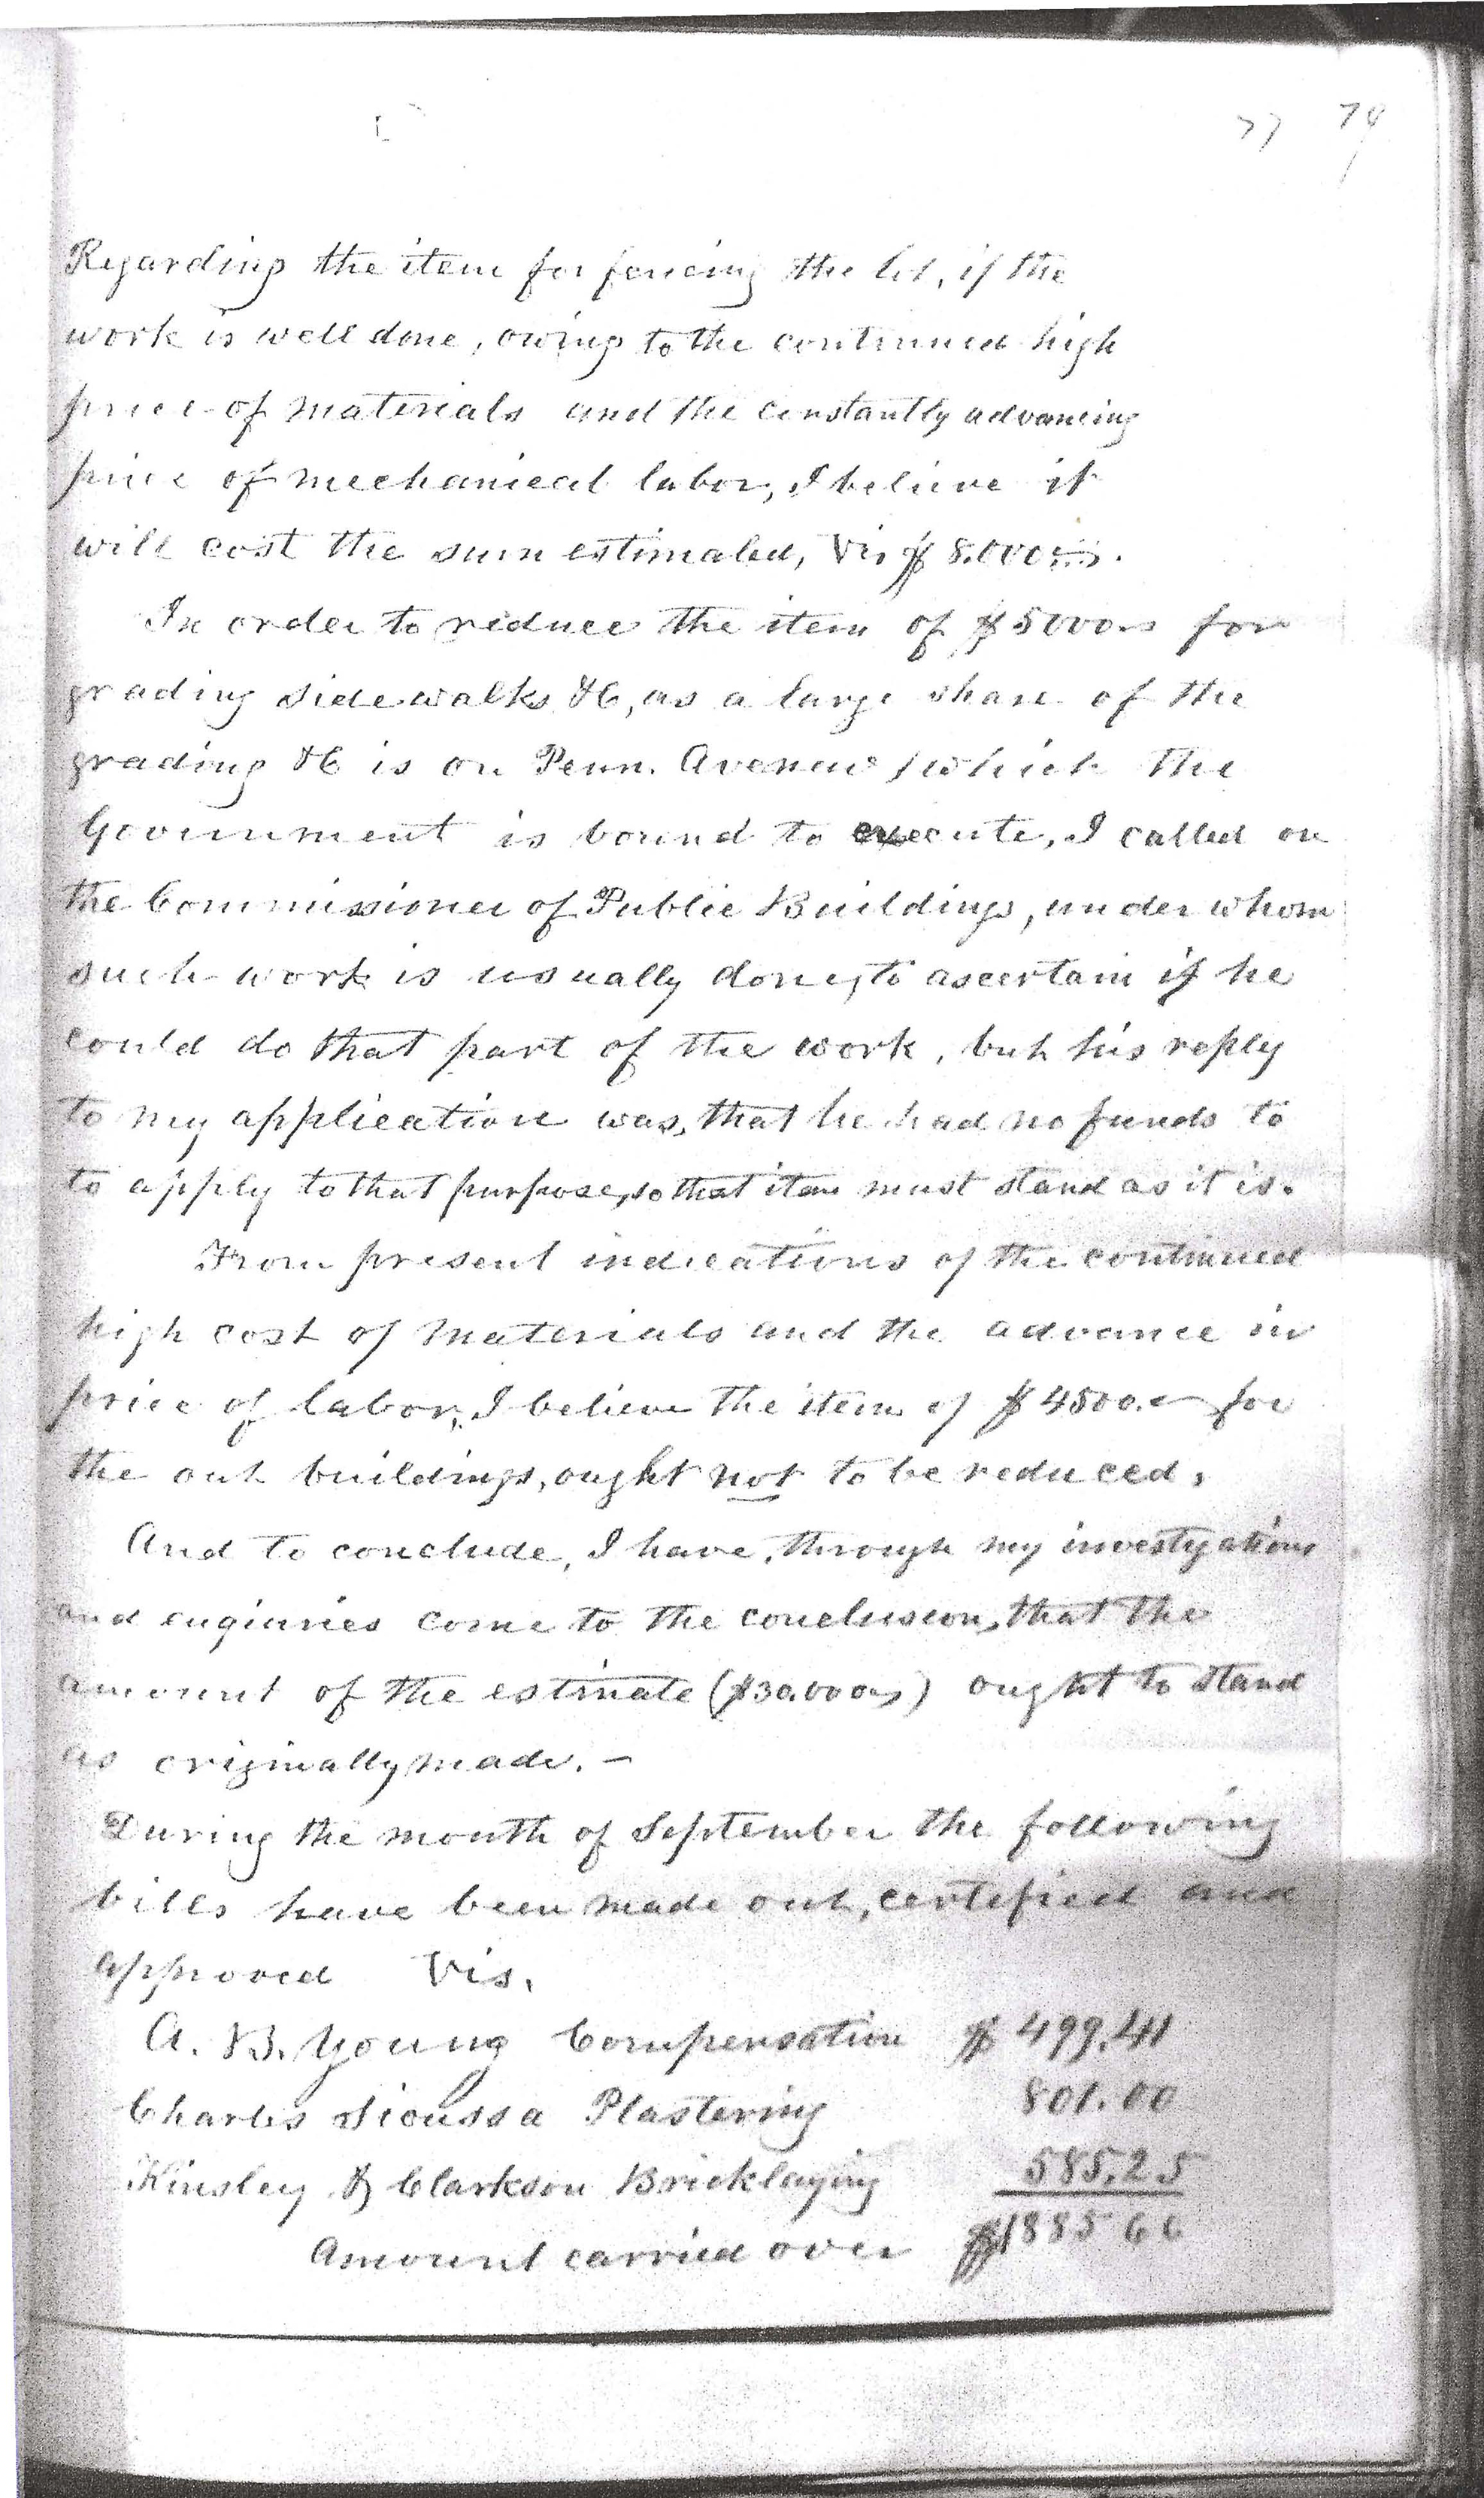 Monthly Report of the Superintendent of Construction, October 2, 1865, Page 3 of 4